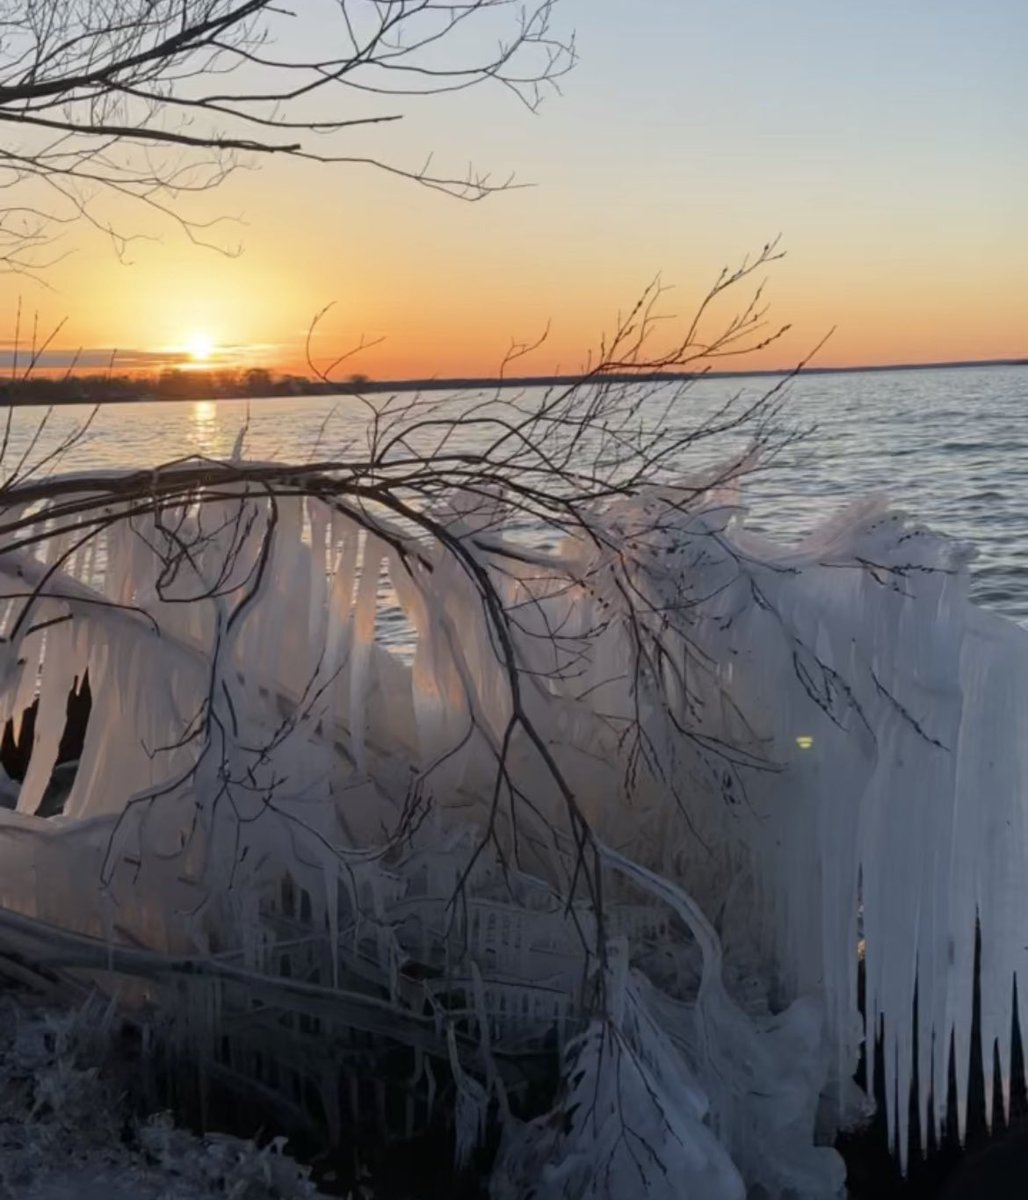 Look at the beautiful ice sculptures by the lake tonight. Isn’t nature fascinating? #LakeSimcoe #Nature #Sunset #WaterTherapy